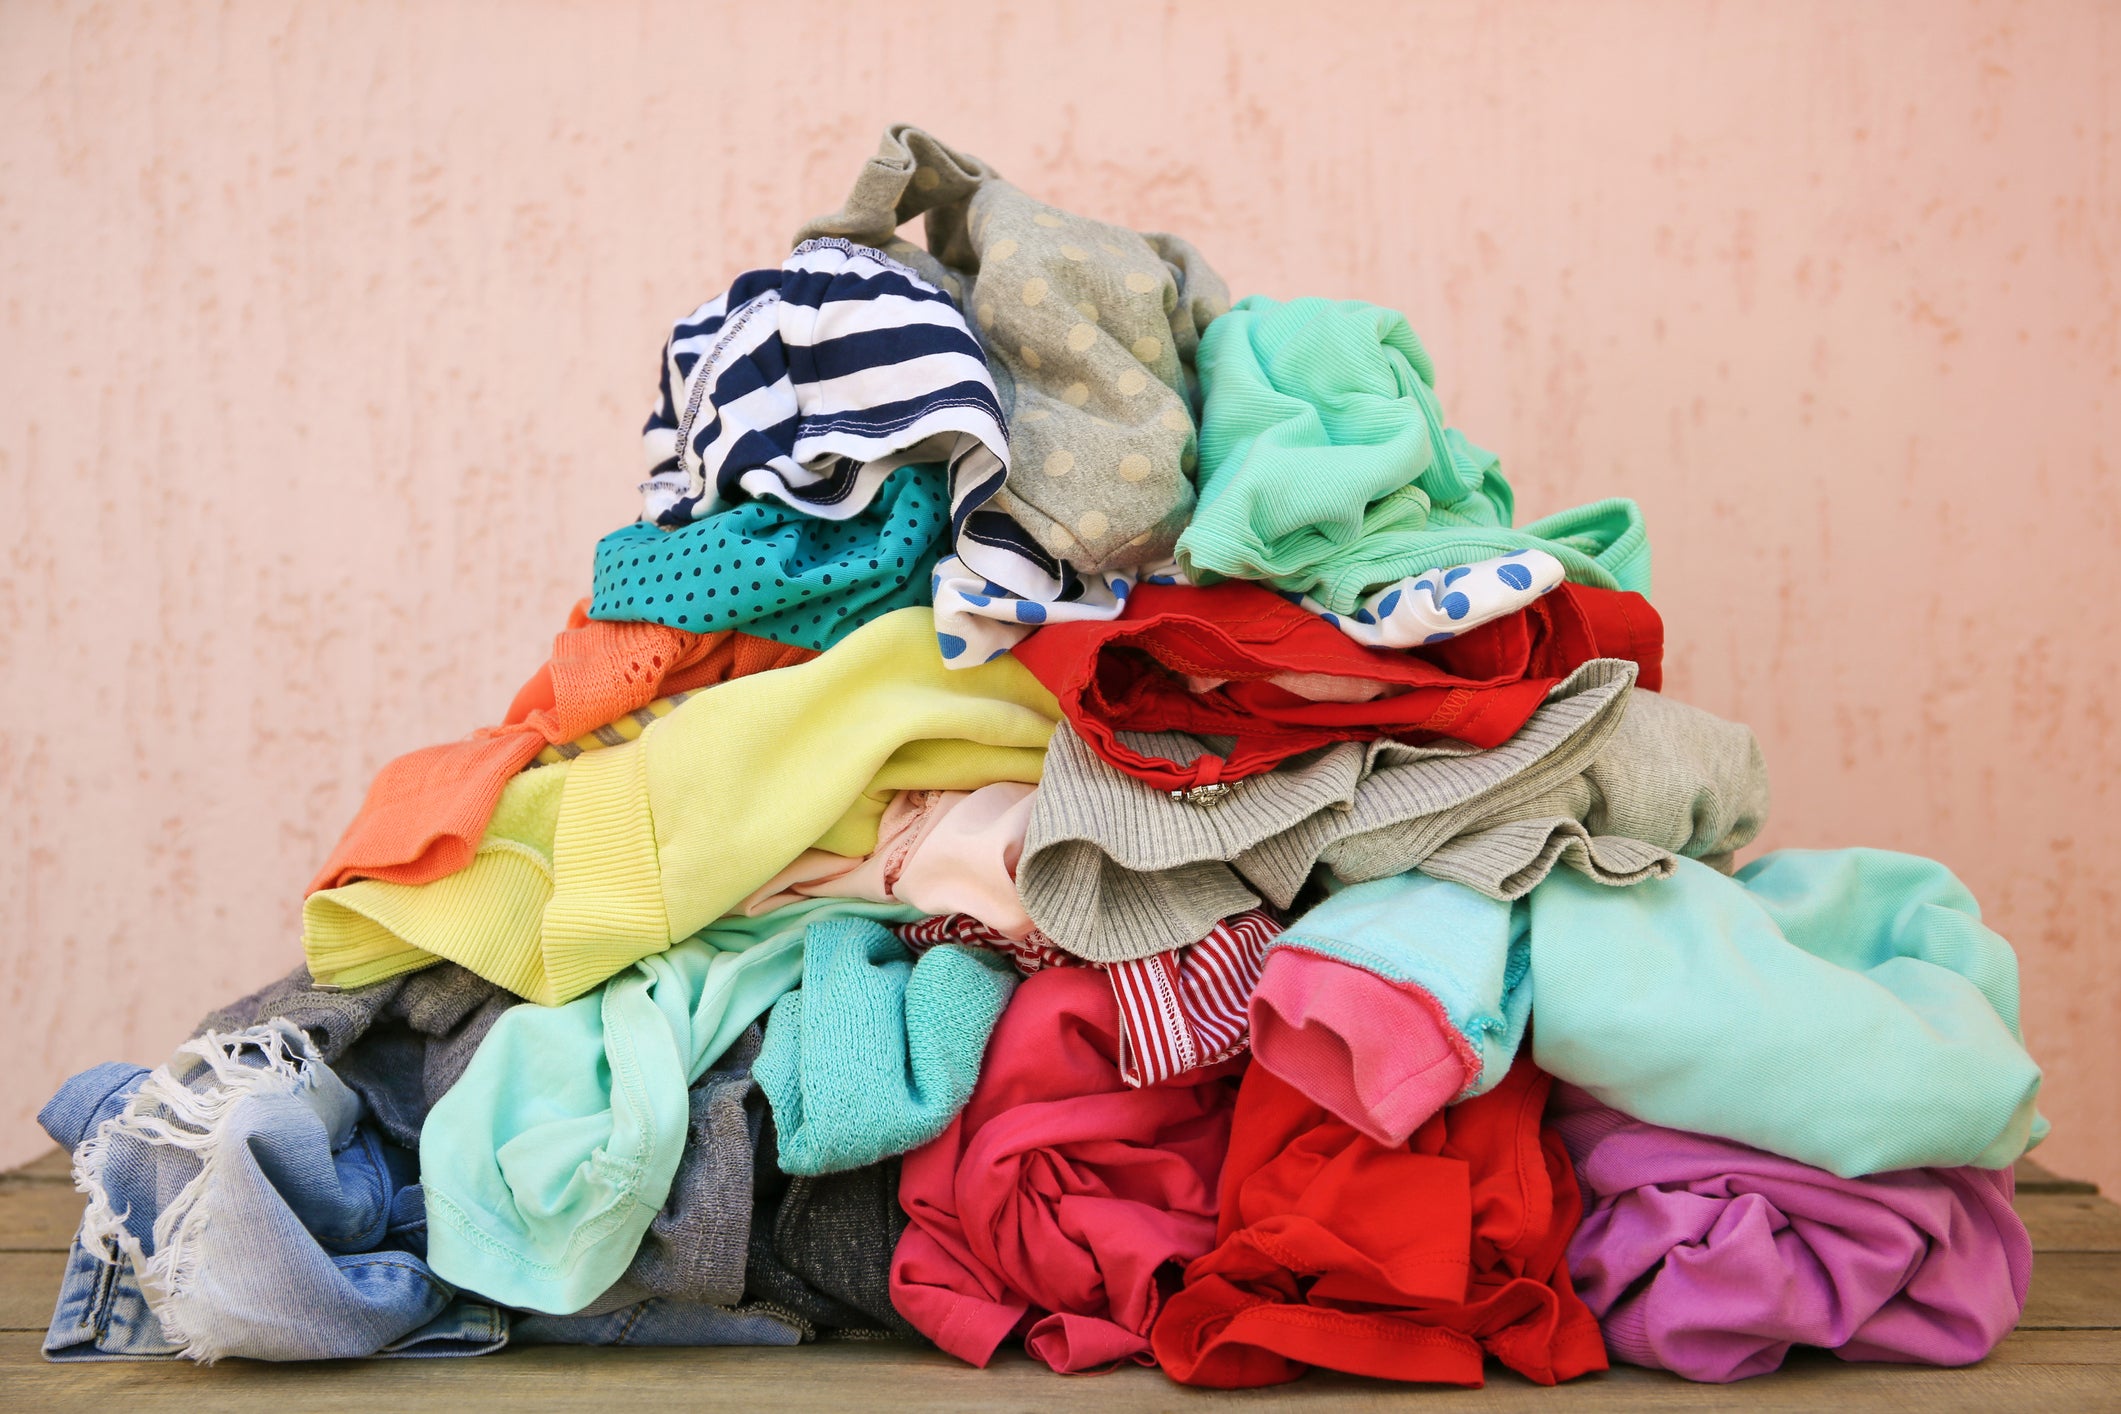 How to Choose Healthy and Sustainable Clothing